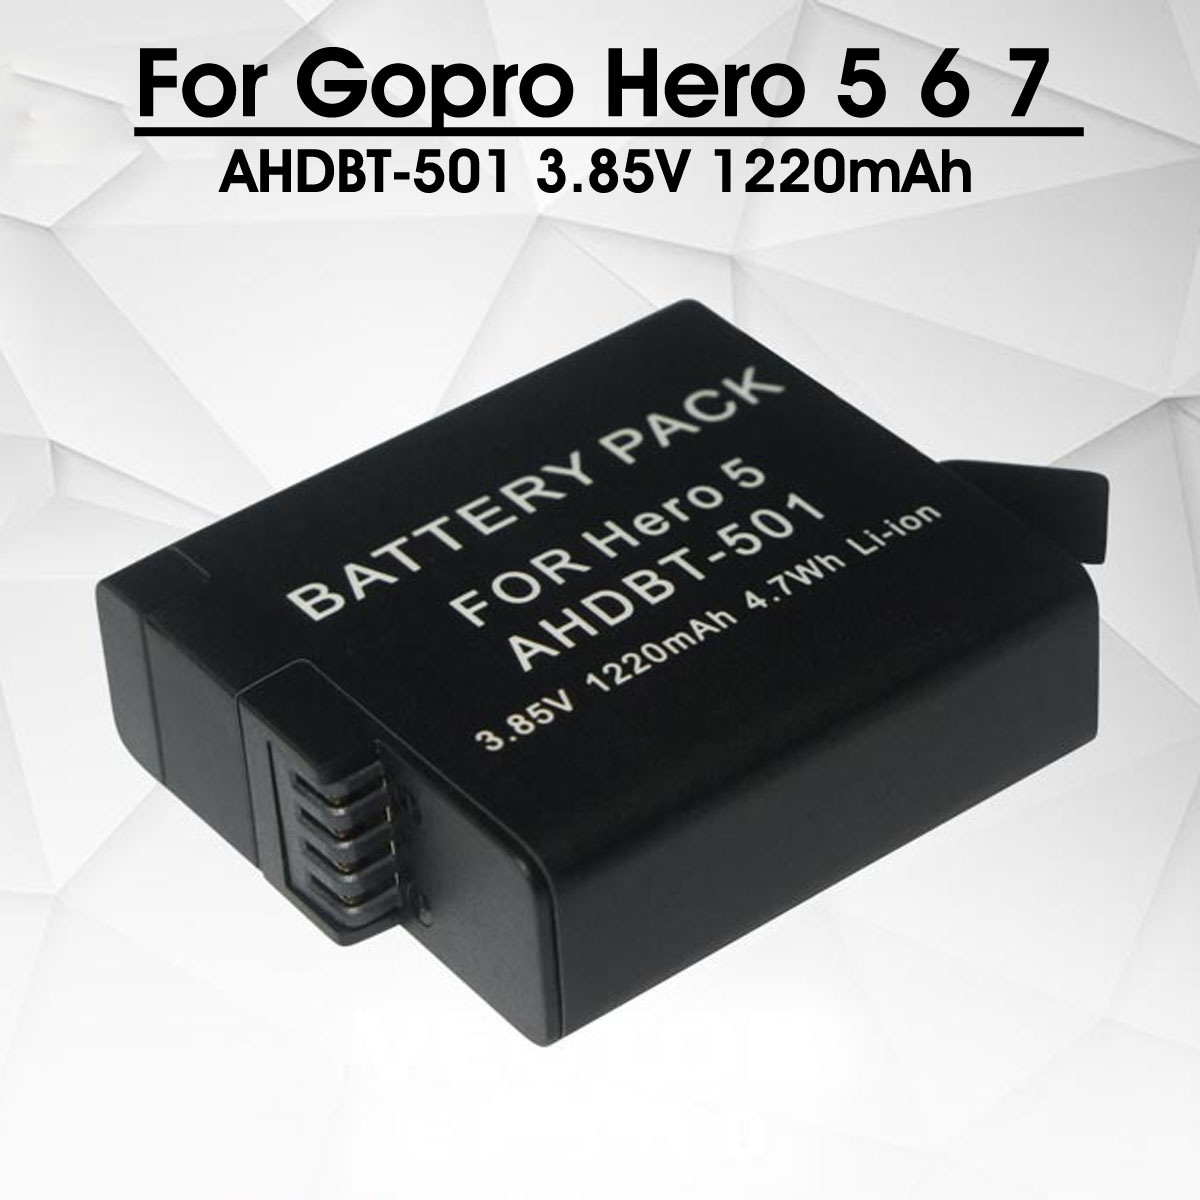 AHDBT-5011220mAh Lithium Battery Rechargeable Battery for Gopro Hero 5 6 7 Camera